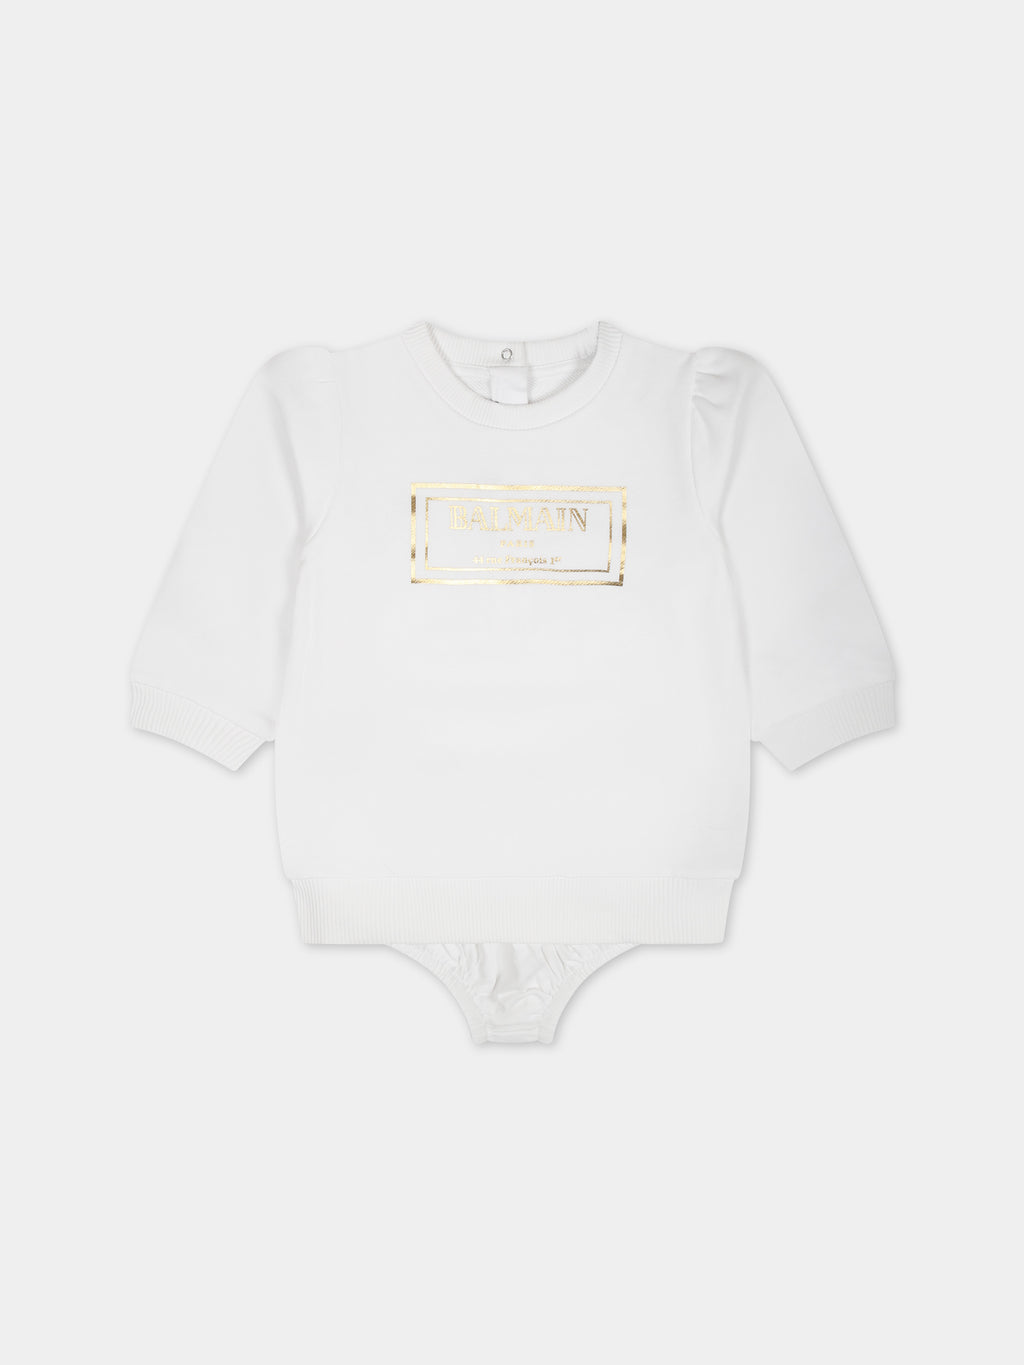 White dress for baby girl with logo